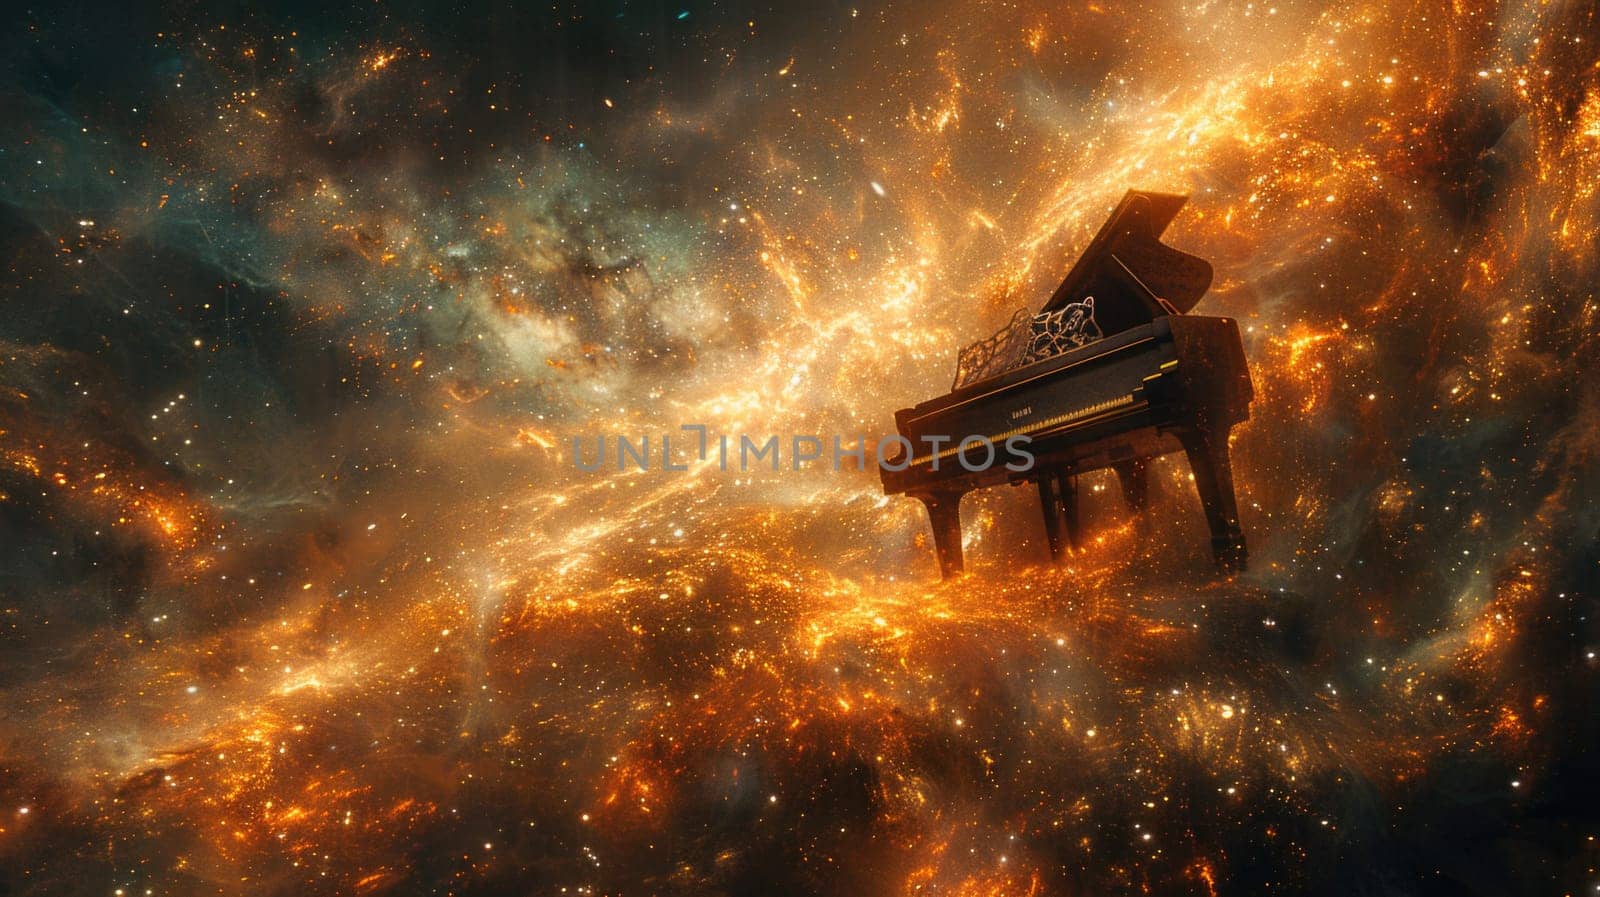 Grand Piano Amidst Starry Space by but_photo